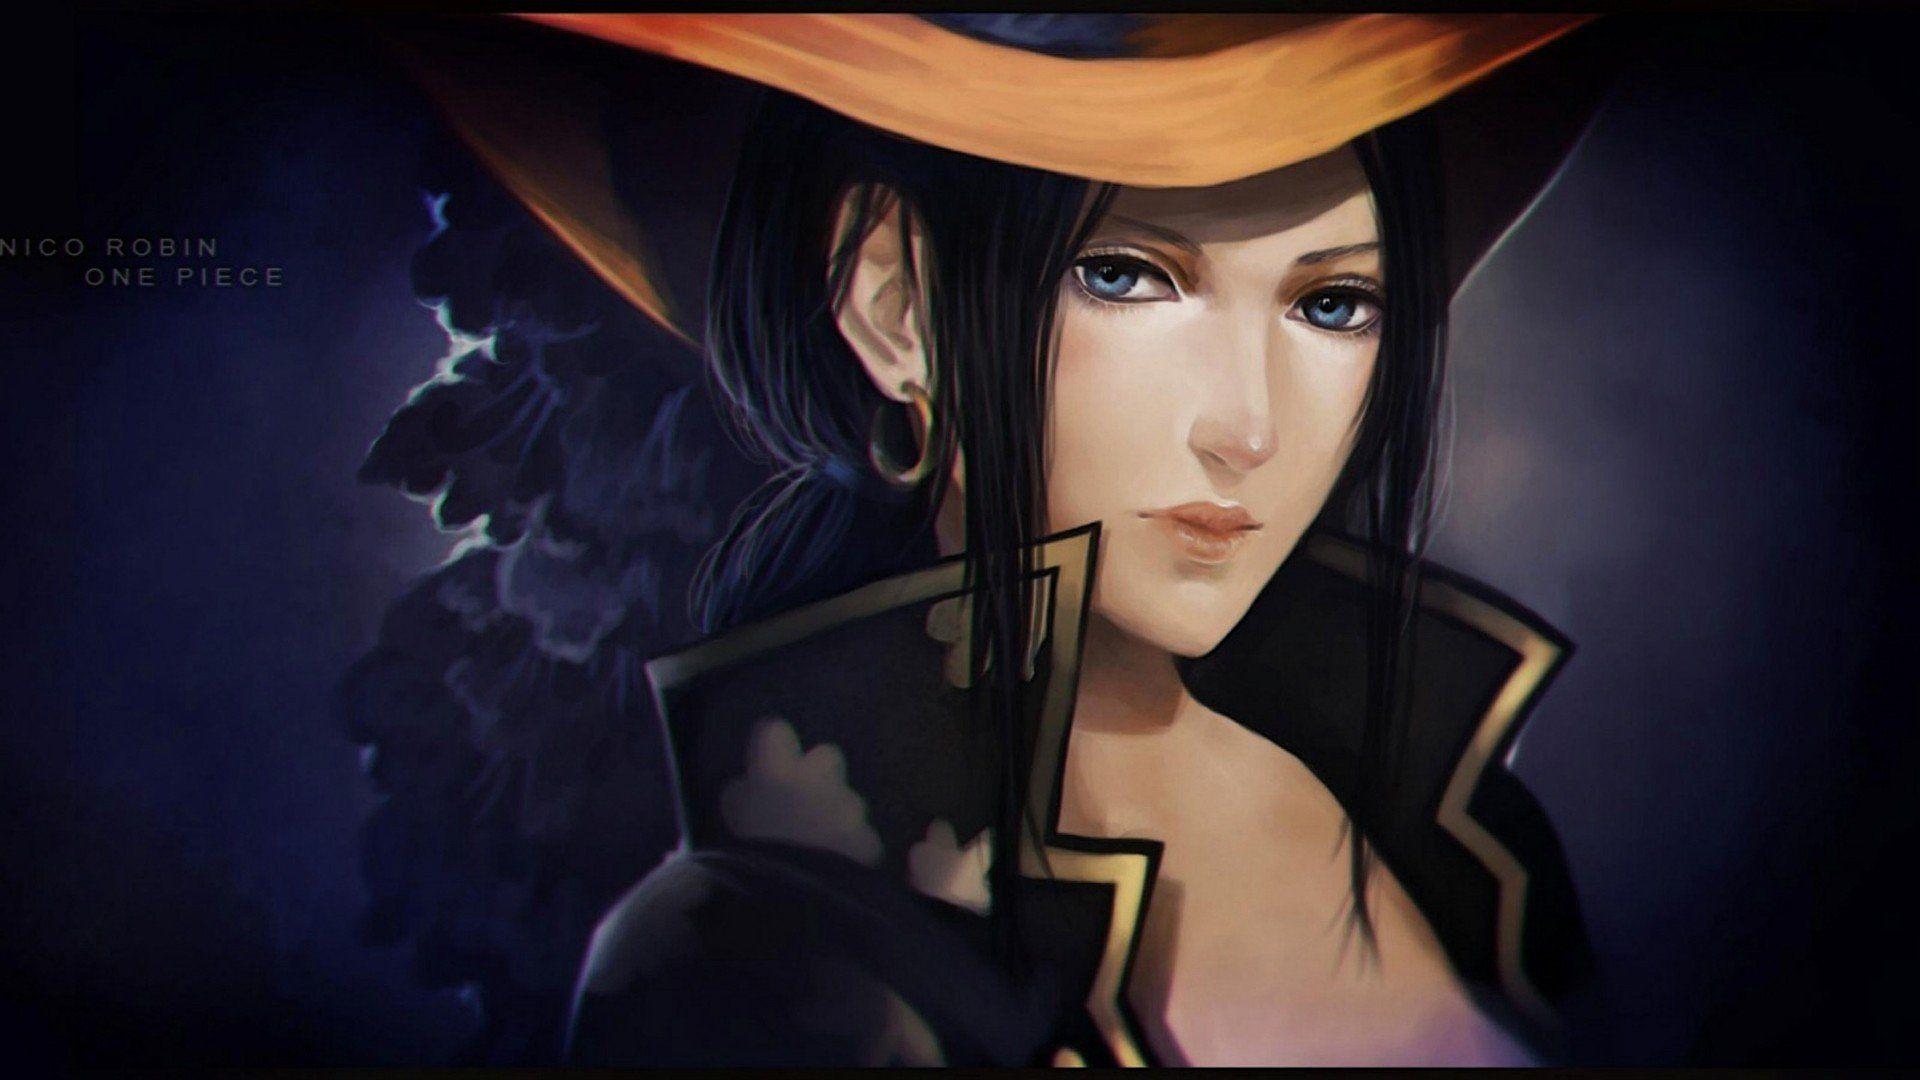 nico robin one piece wallpaper and background